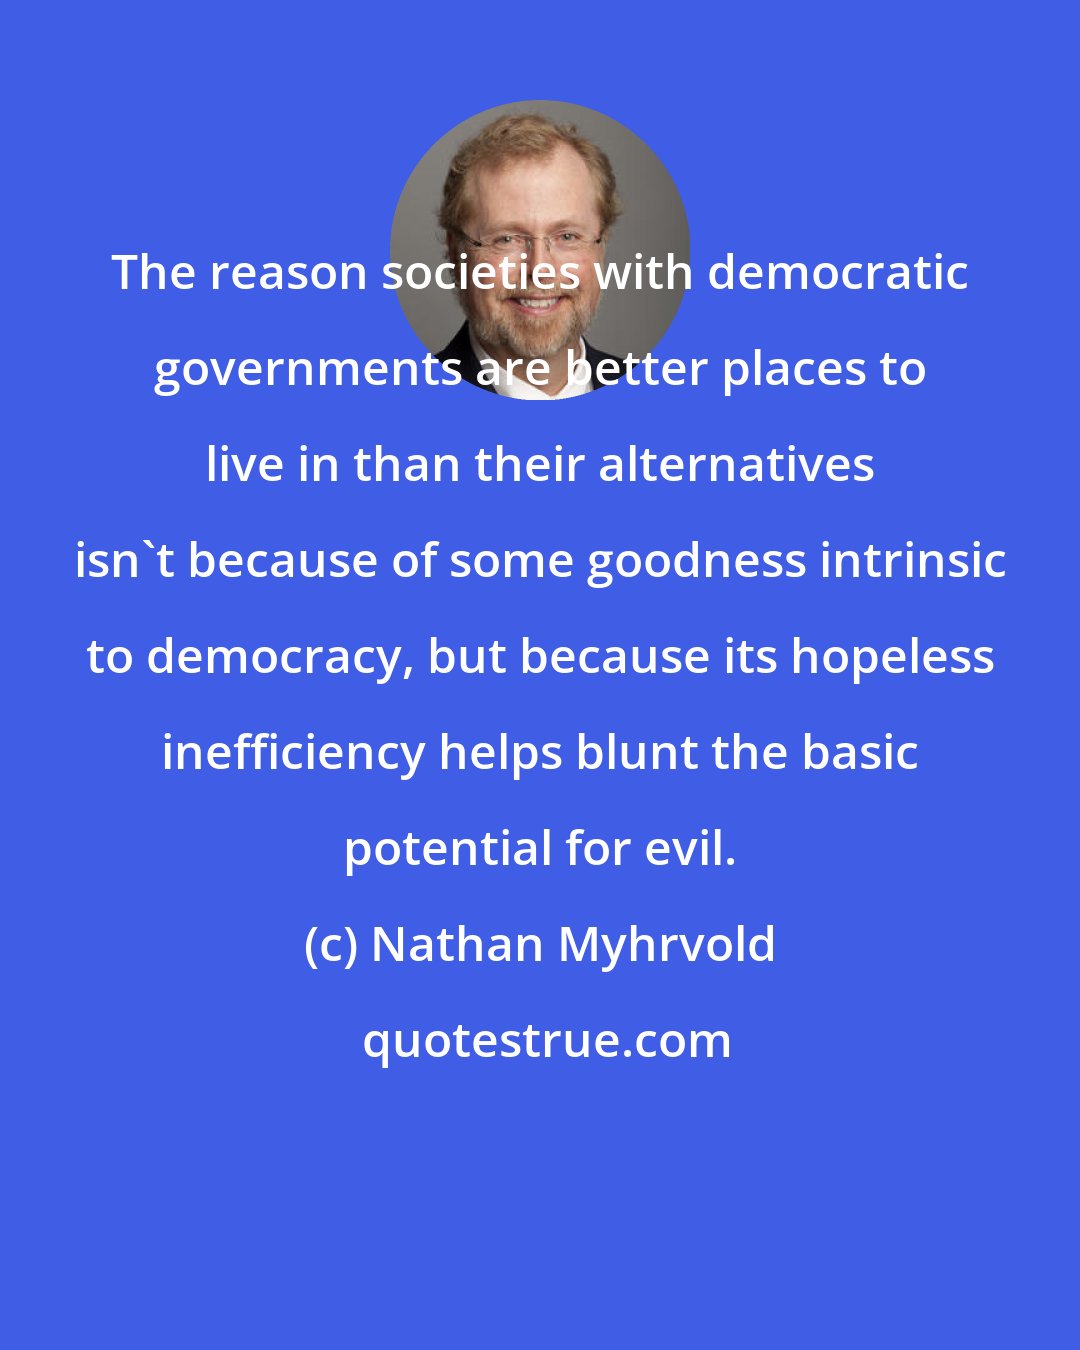 Nathan Myhrvold: The reason societies with democratic governments are better places to live in than their alternatives isn't because of some goodness intrinsic to democracy, but because its hopeless inefficiency helps blunt the basic potential for evil.